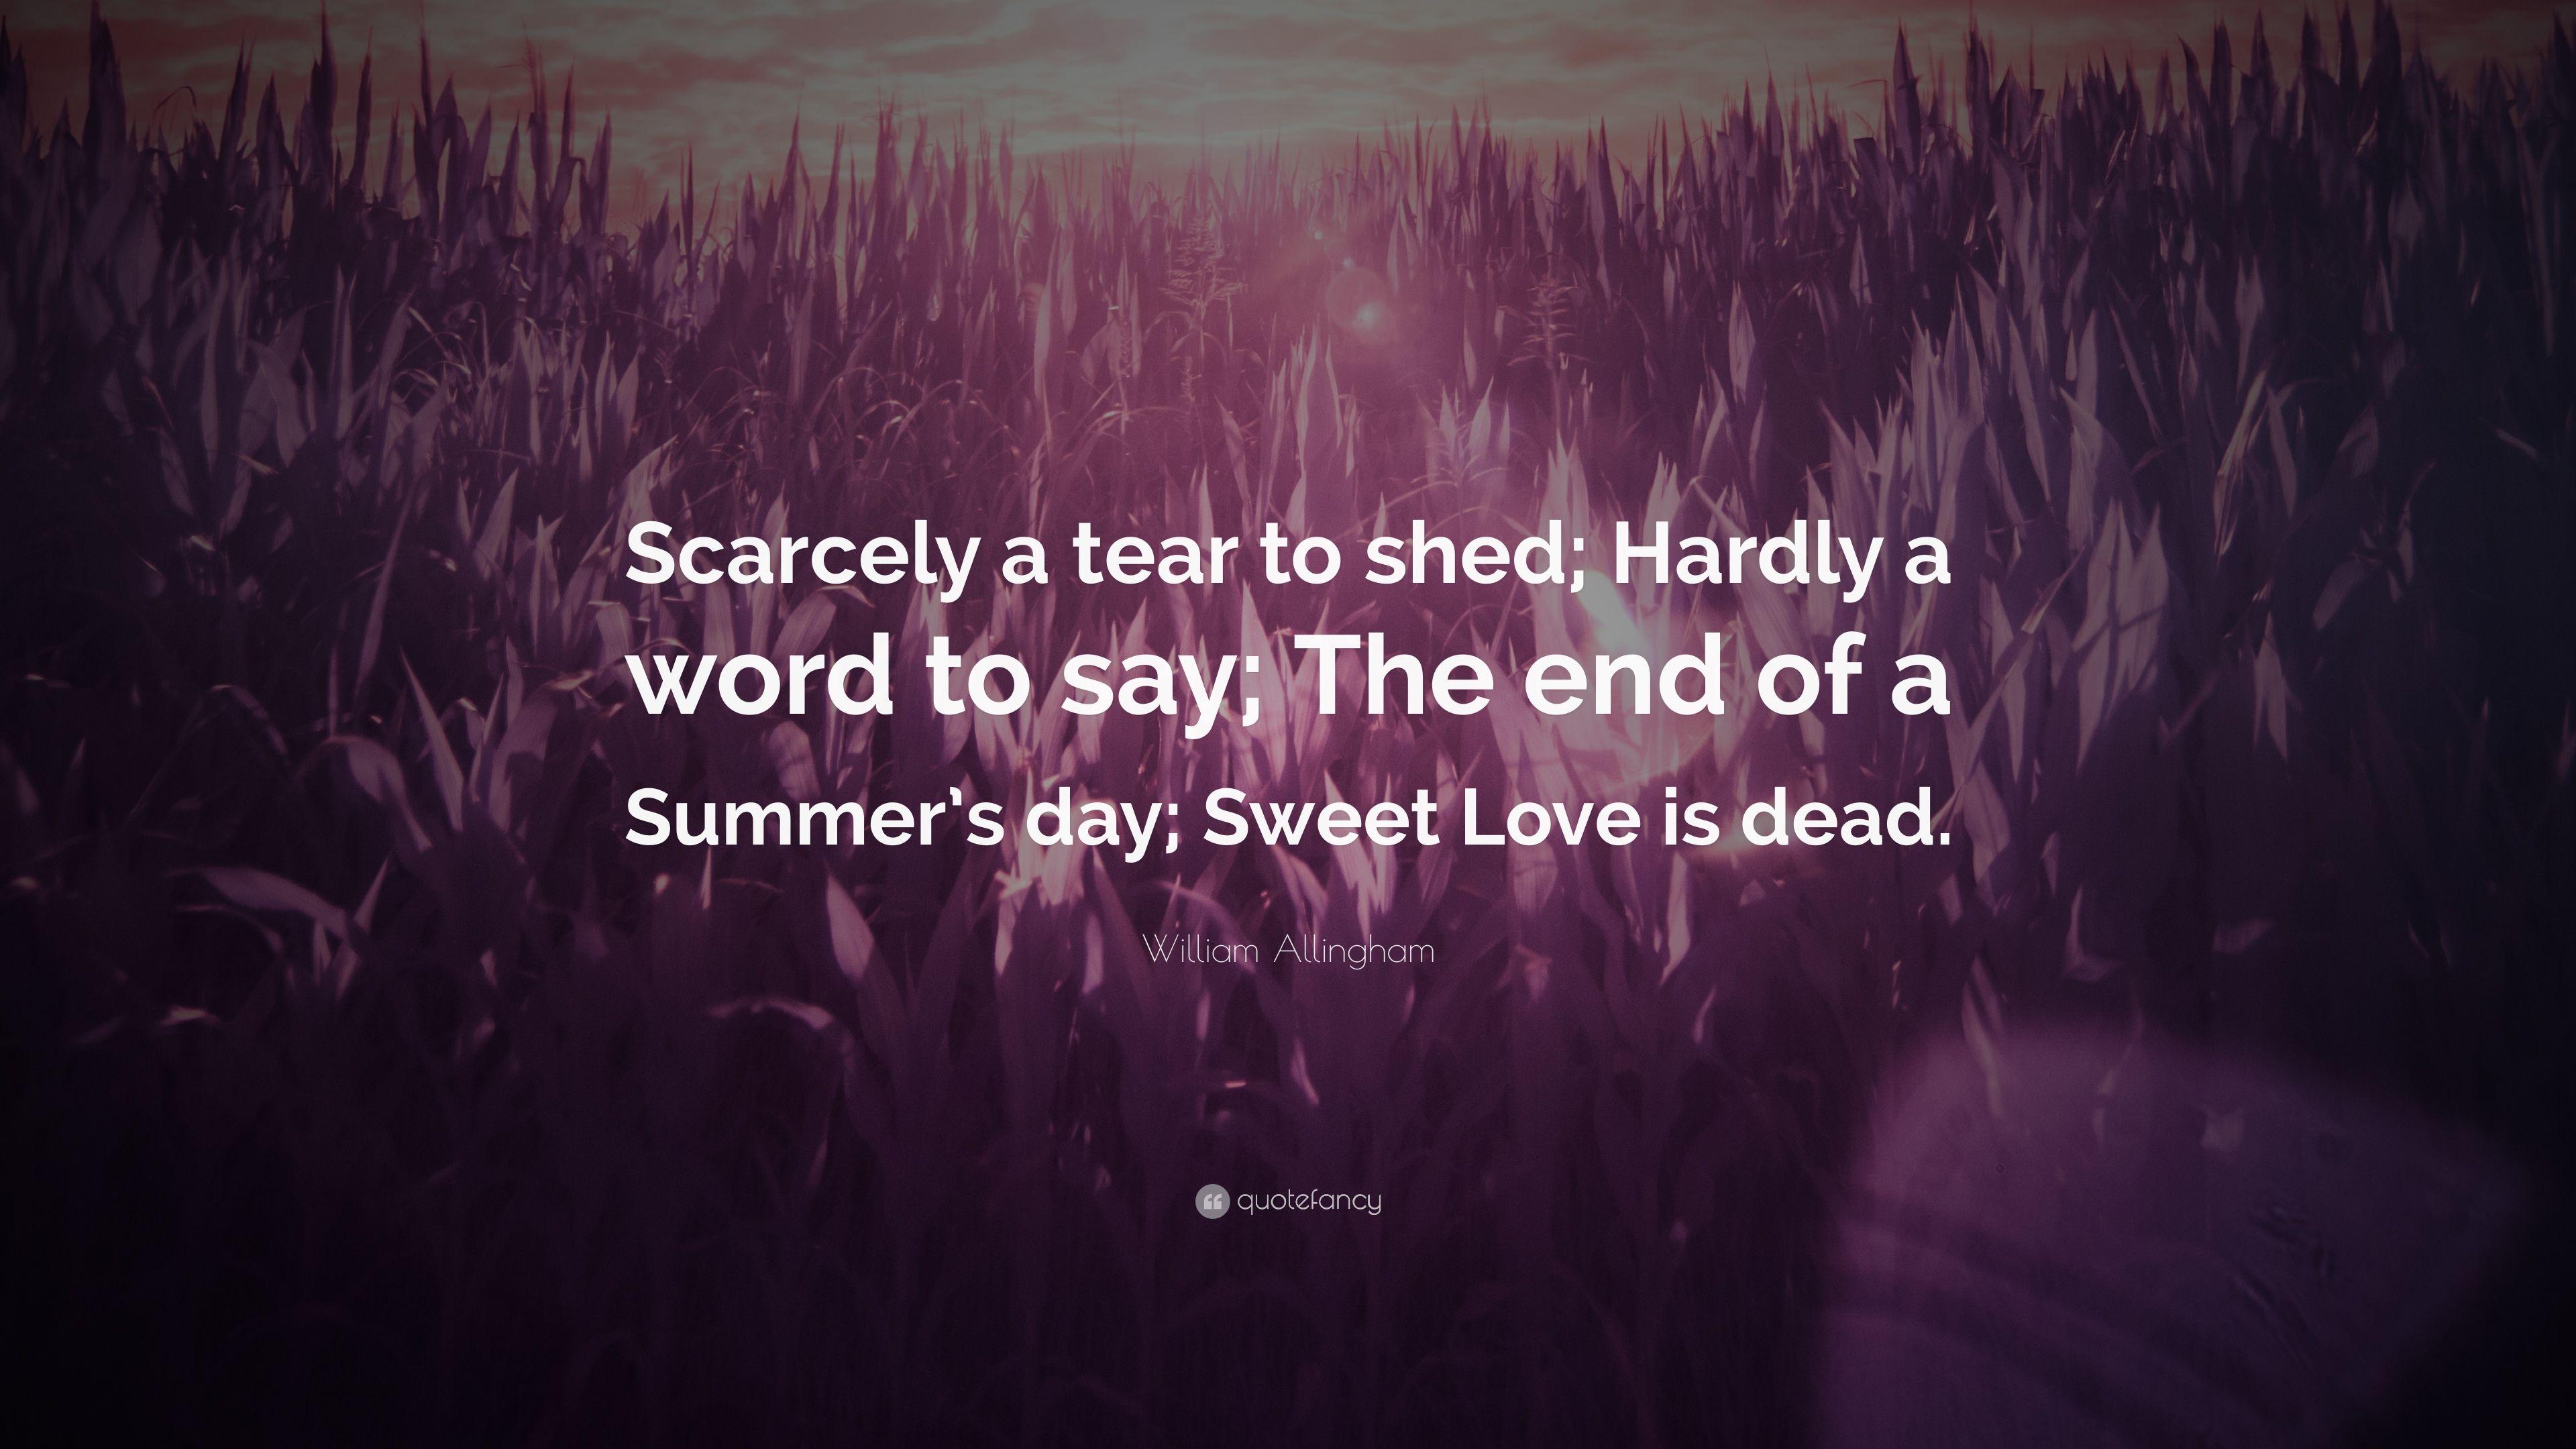 William Allingham Quote: “Scarcely a tear to shed; Hardly a word to